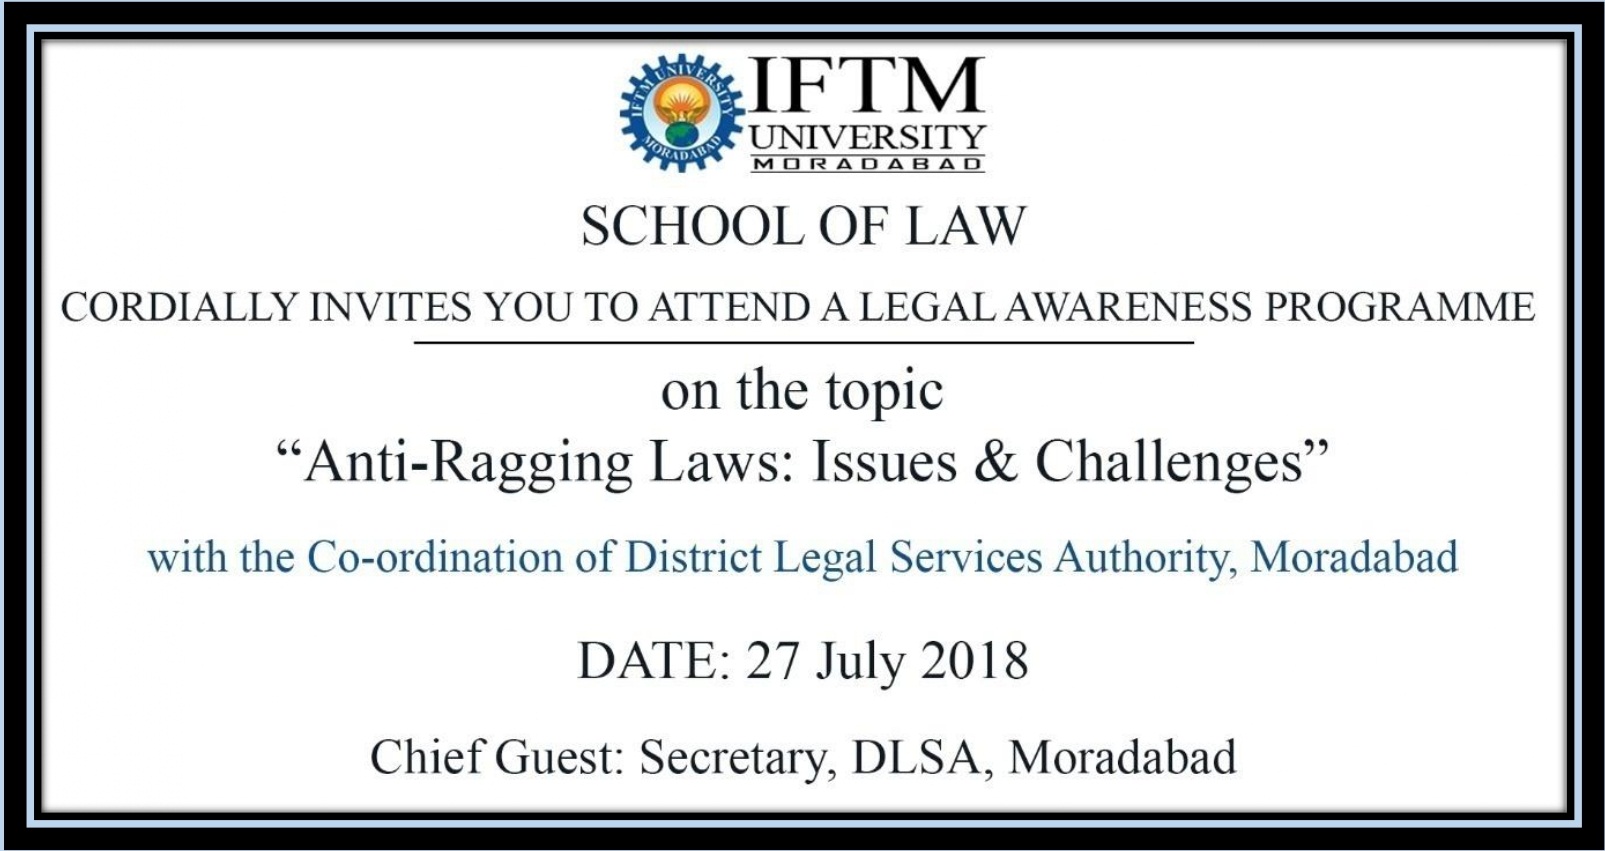 A Legal Awareness Programme on “Anti-Ragging Laws: Issues & Challenges.